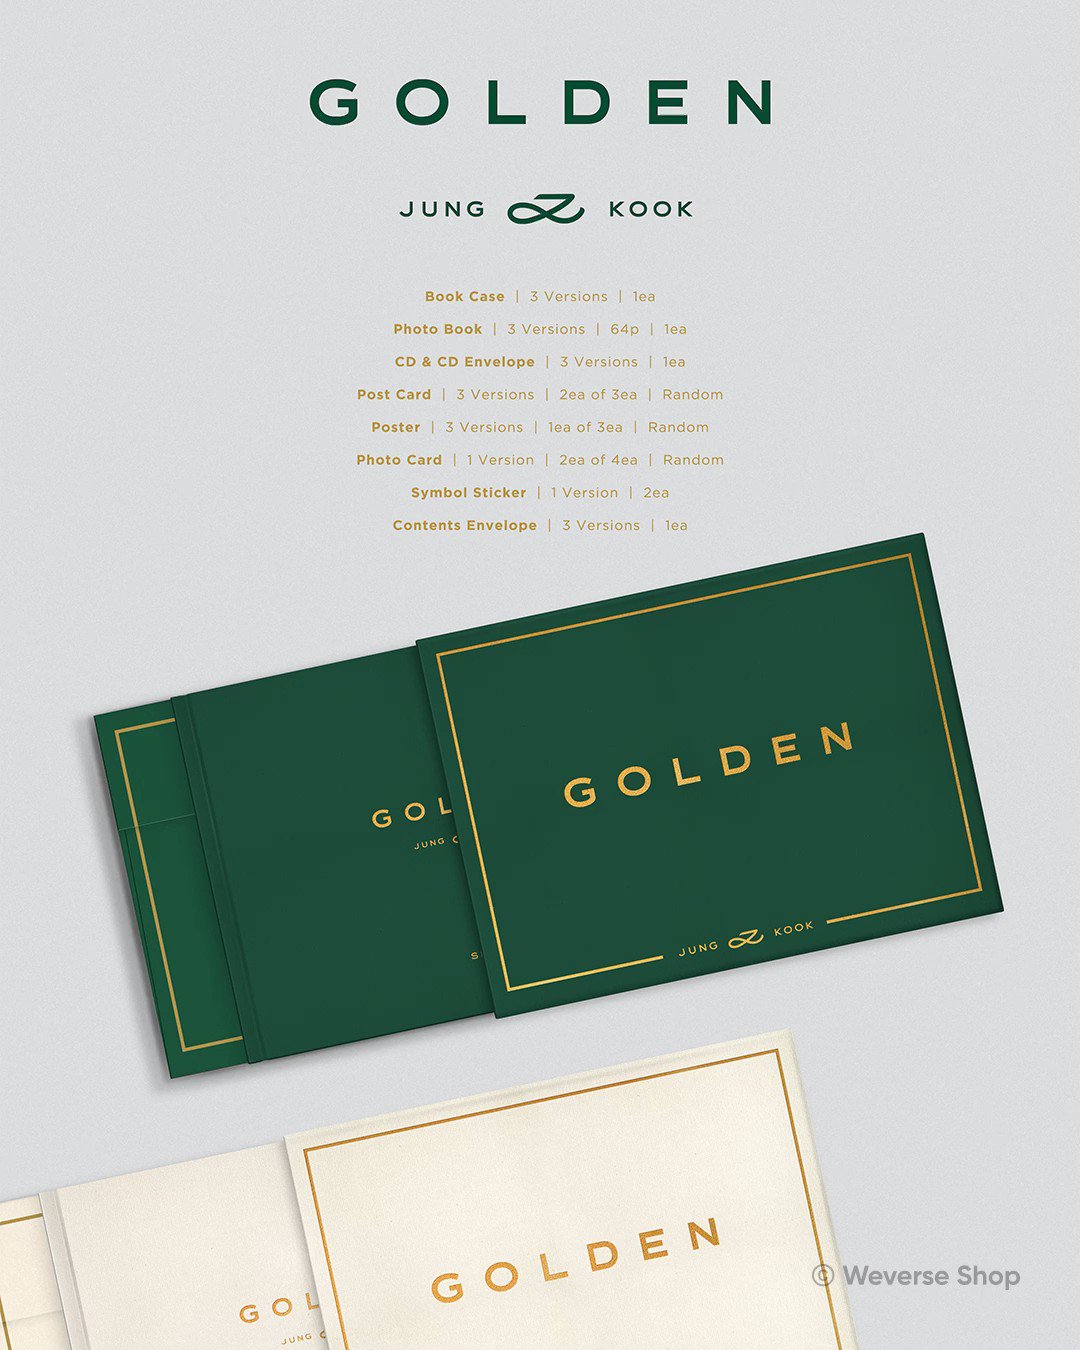 Weverse Shop on X: Pre-order #JungKook (@bts_bighit) Solo Album [GOLDEN]  The youngest member of #BTS is here with his solo album!✨ Don't miss out on  the special pre-order events prepared by Weverse